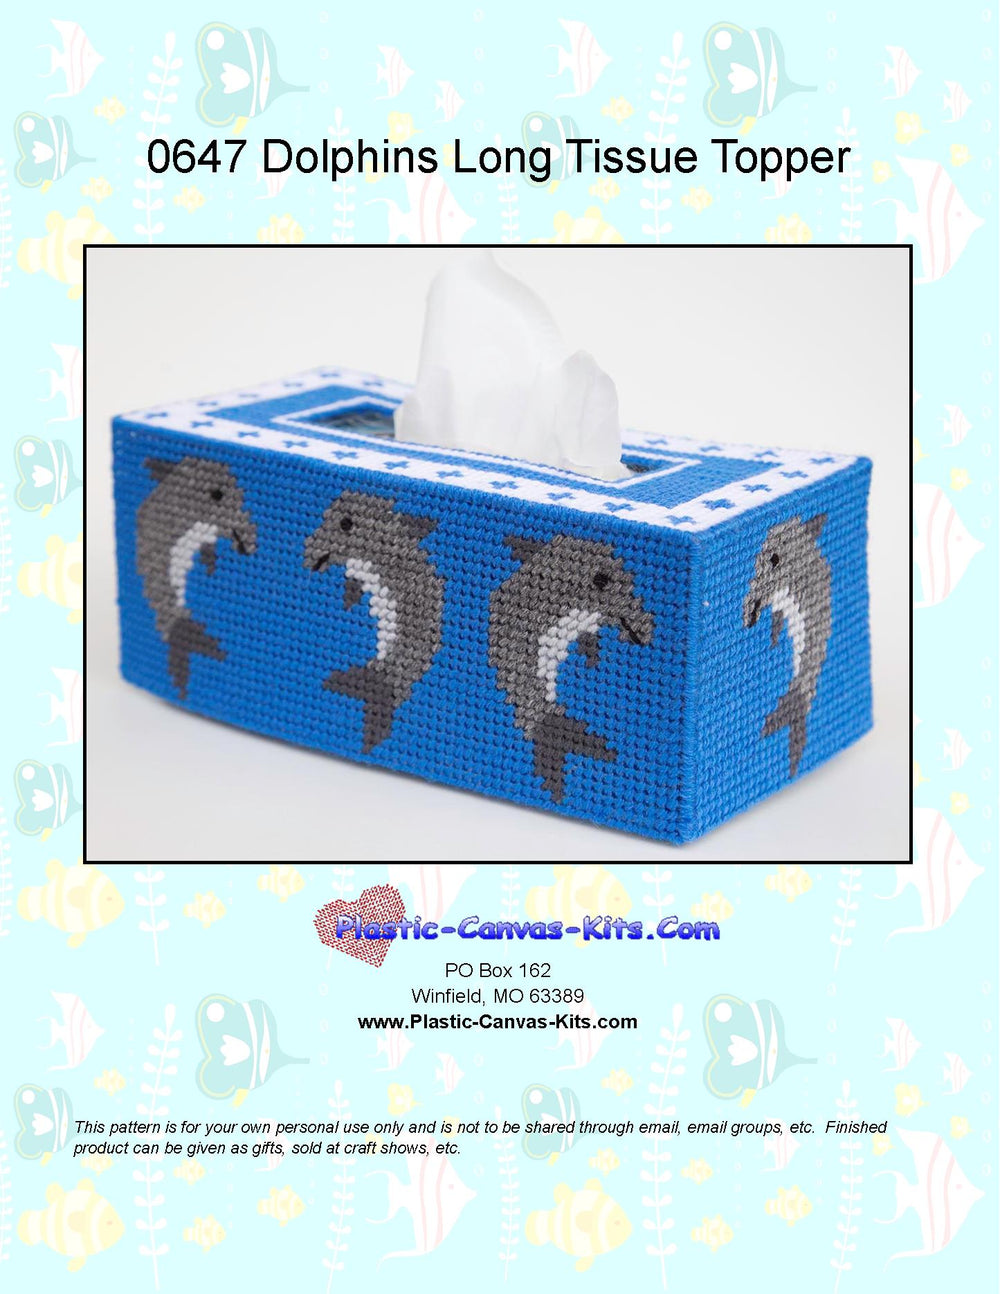 Dolphins Long Tissue Topper